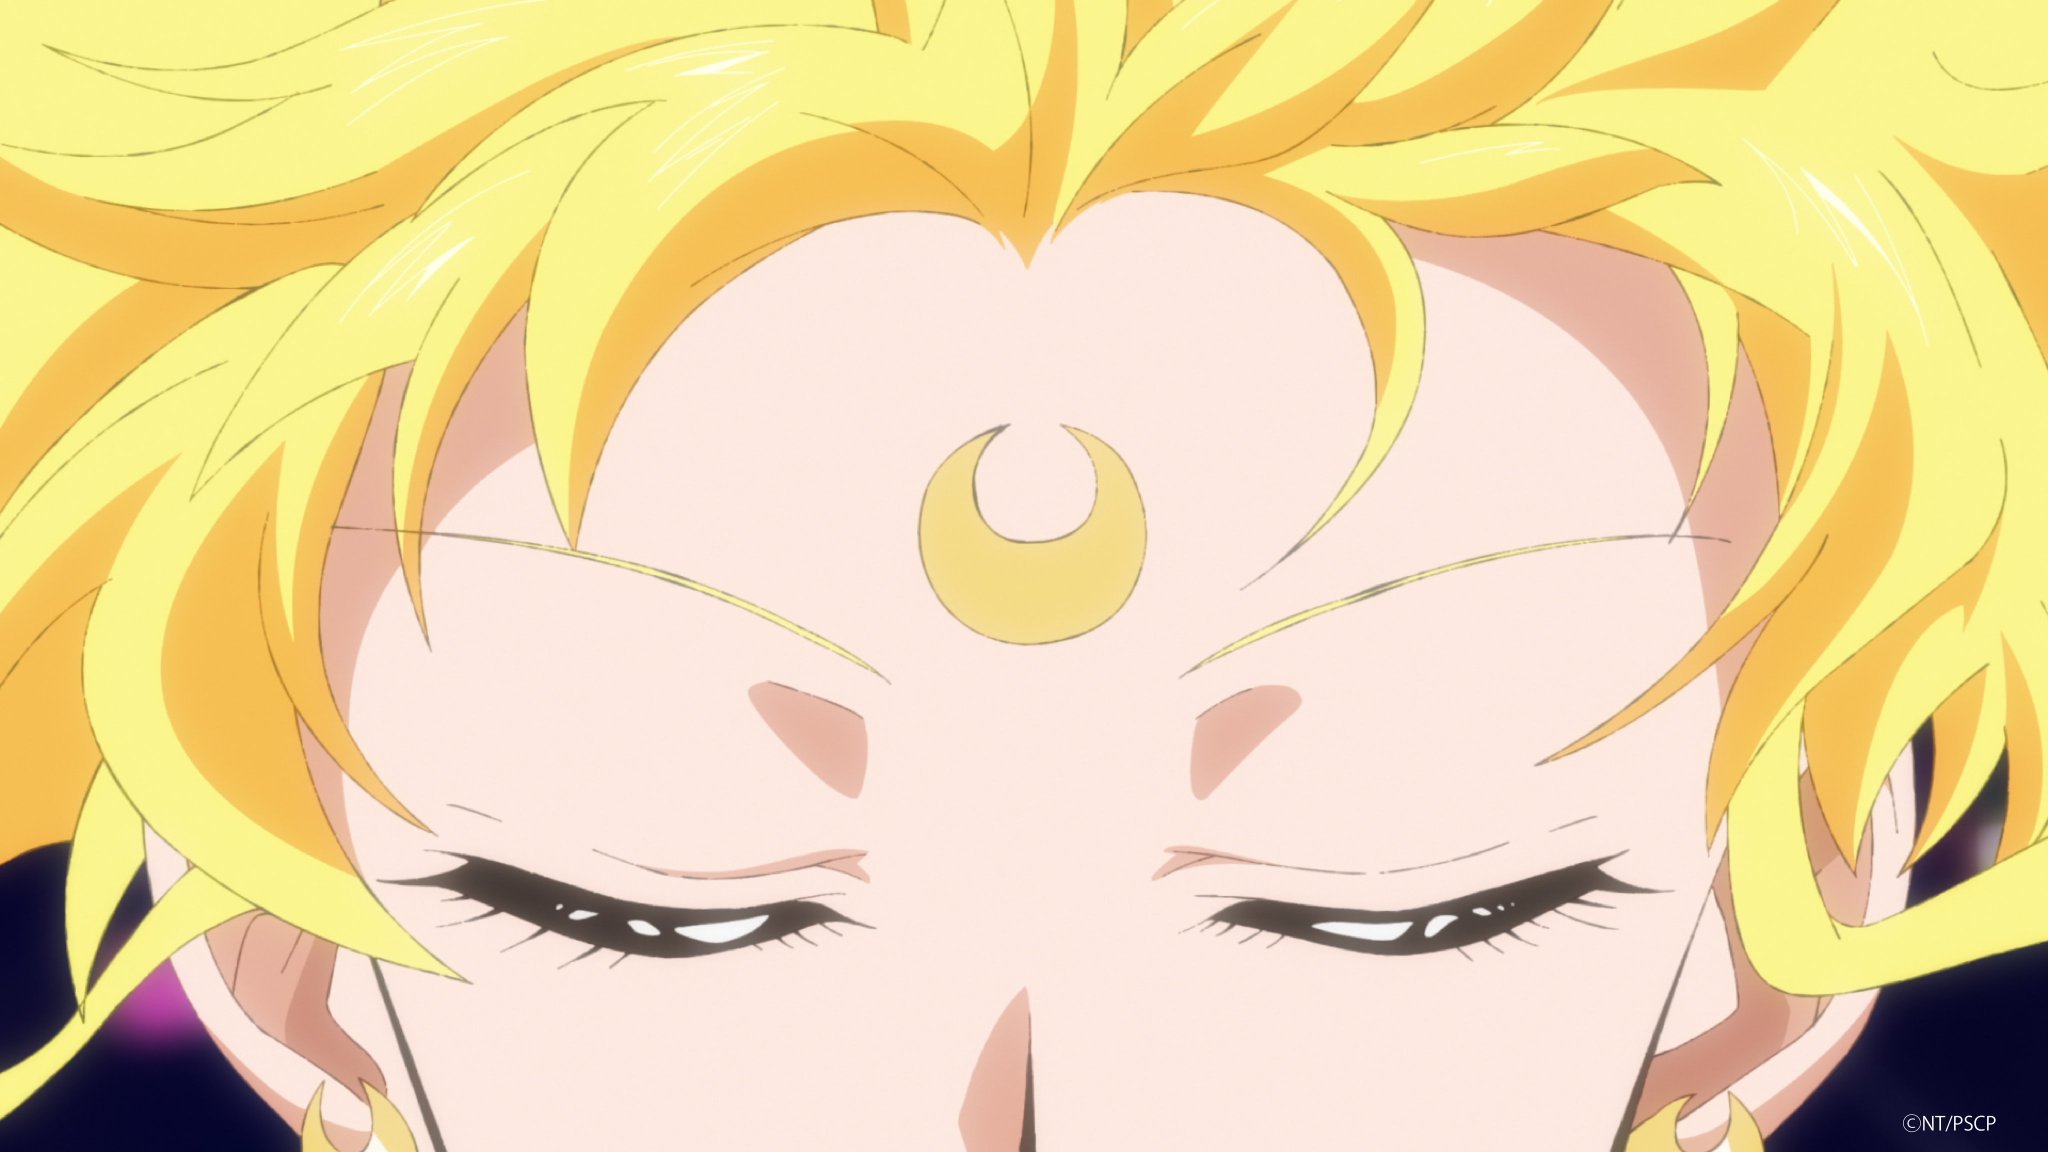 Sailor Moon Cosmos anime films release Shadow Galactica character trailer  and full cast